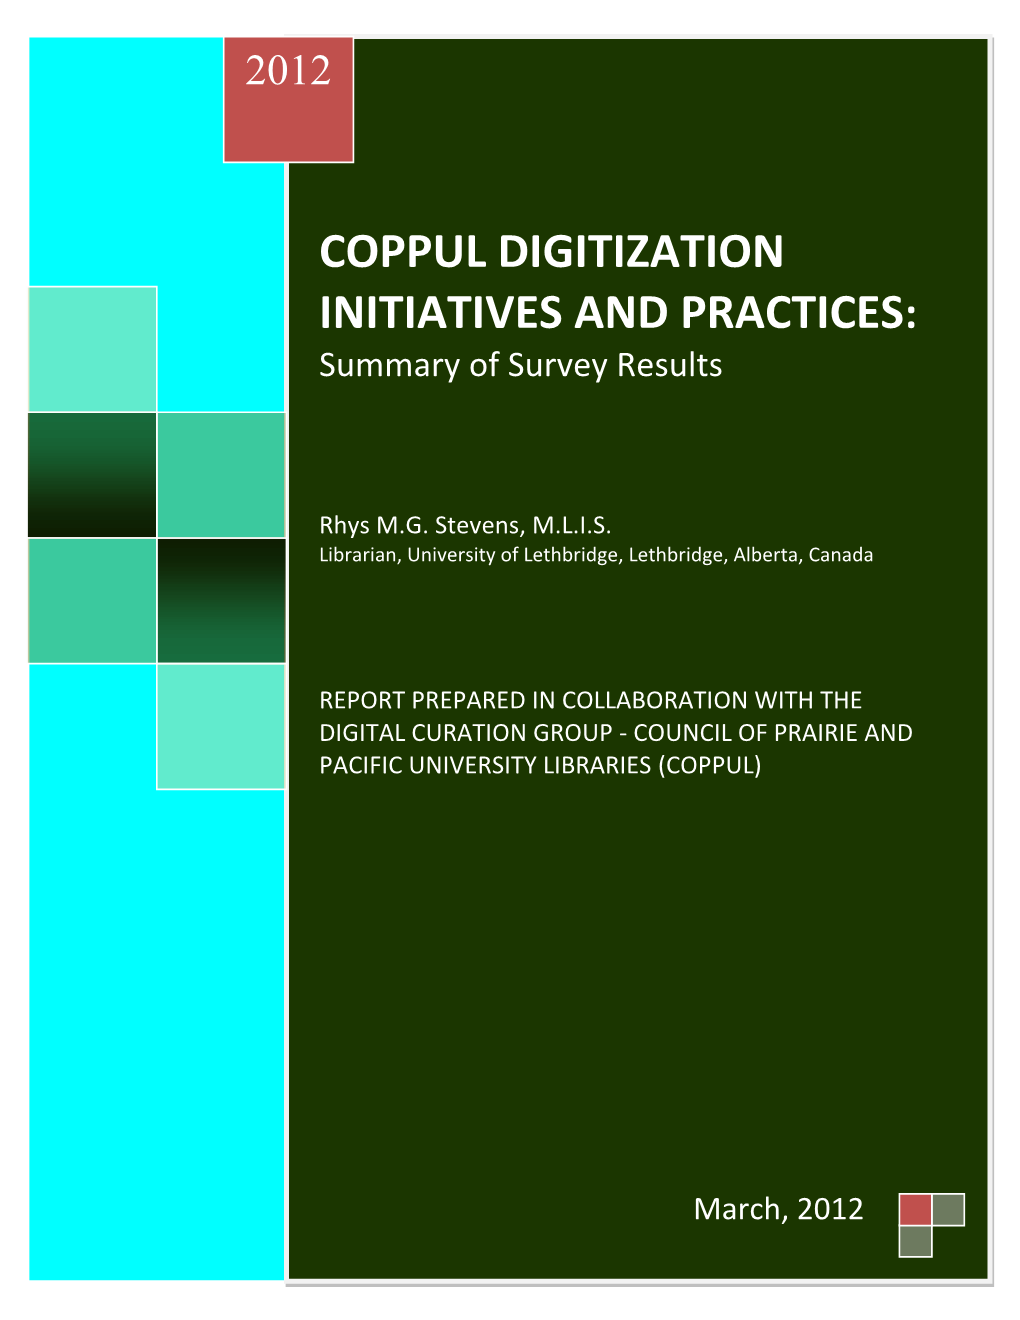 COPPUL DIGITIZATION INITIATIVES and PRACTICES: Summary of Survey Results